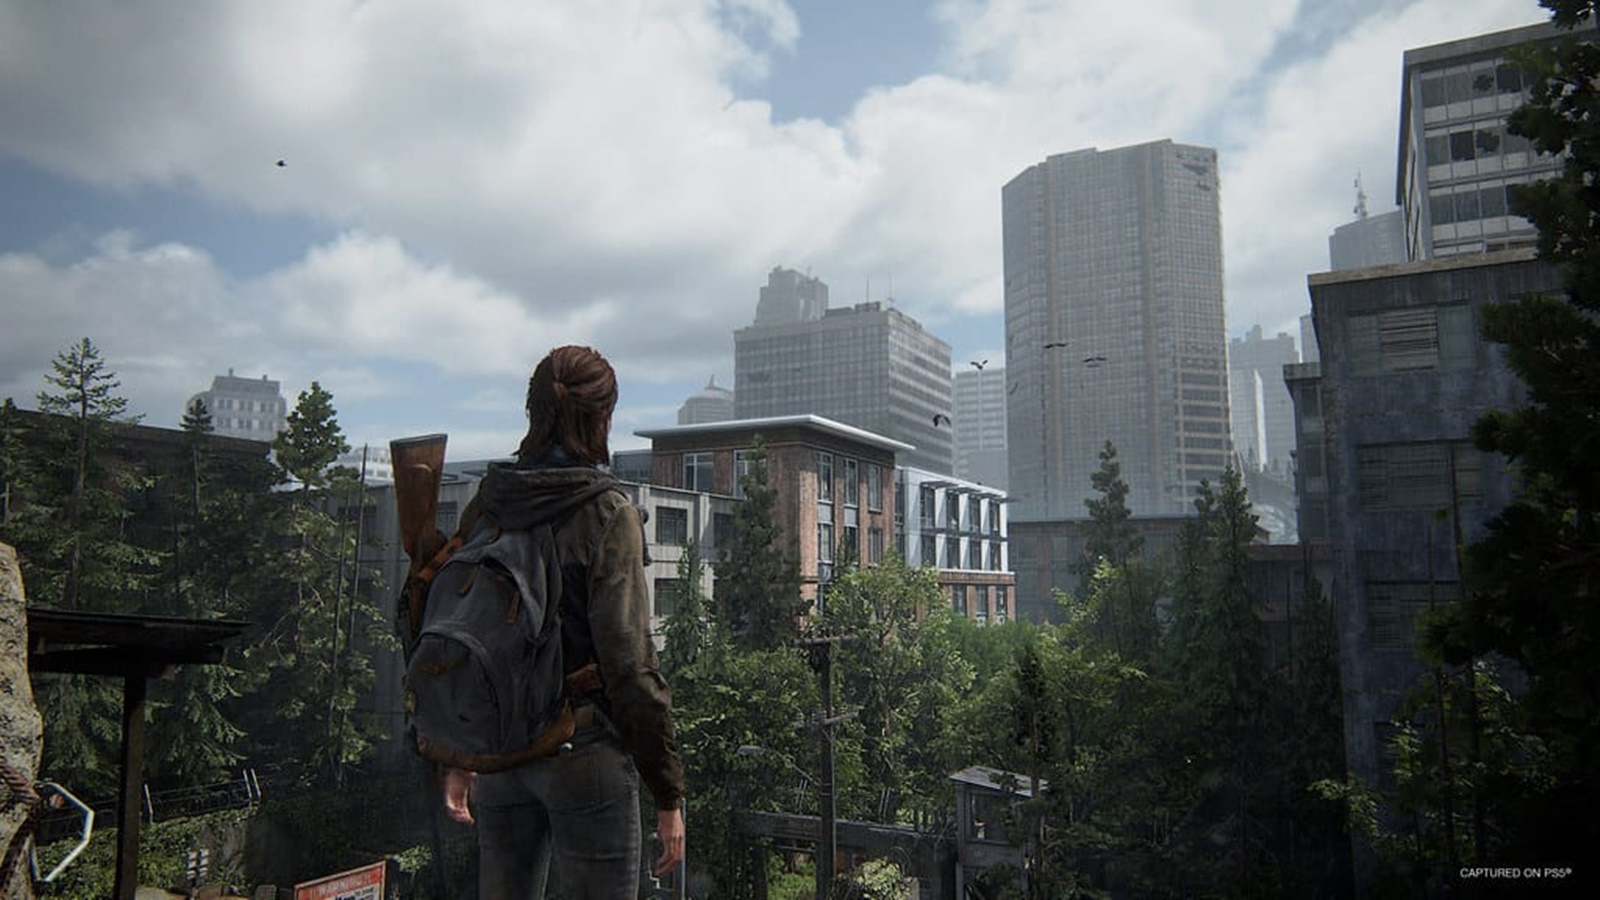 The Last of Us Part 2 Remastered Receives New Trailer for Upcoming No  Return Mode, and More